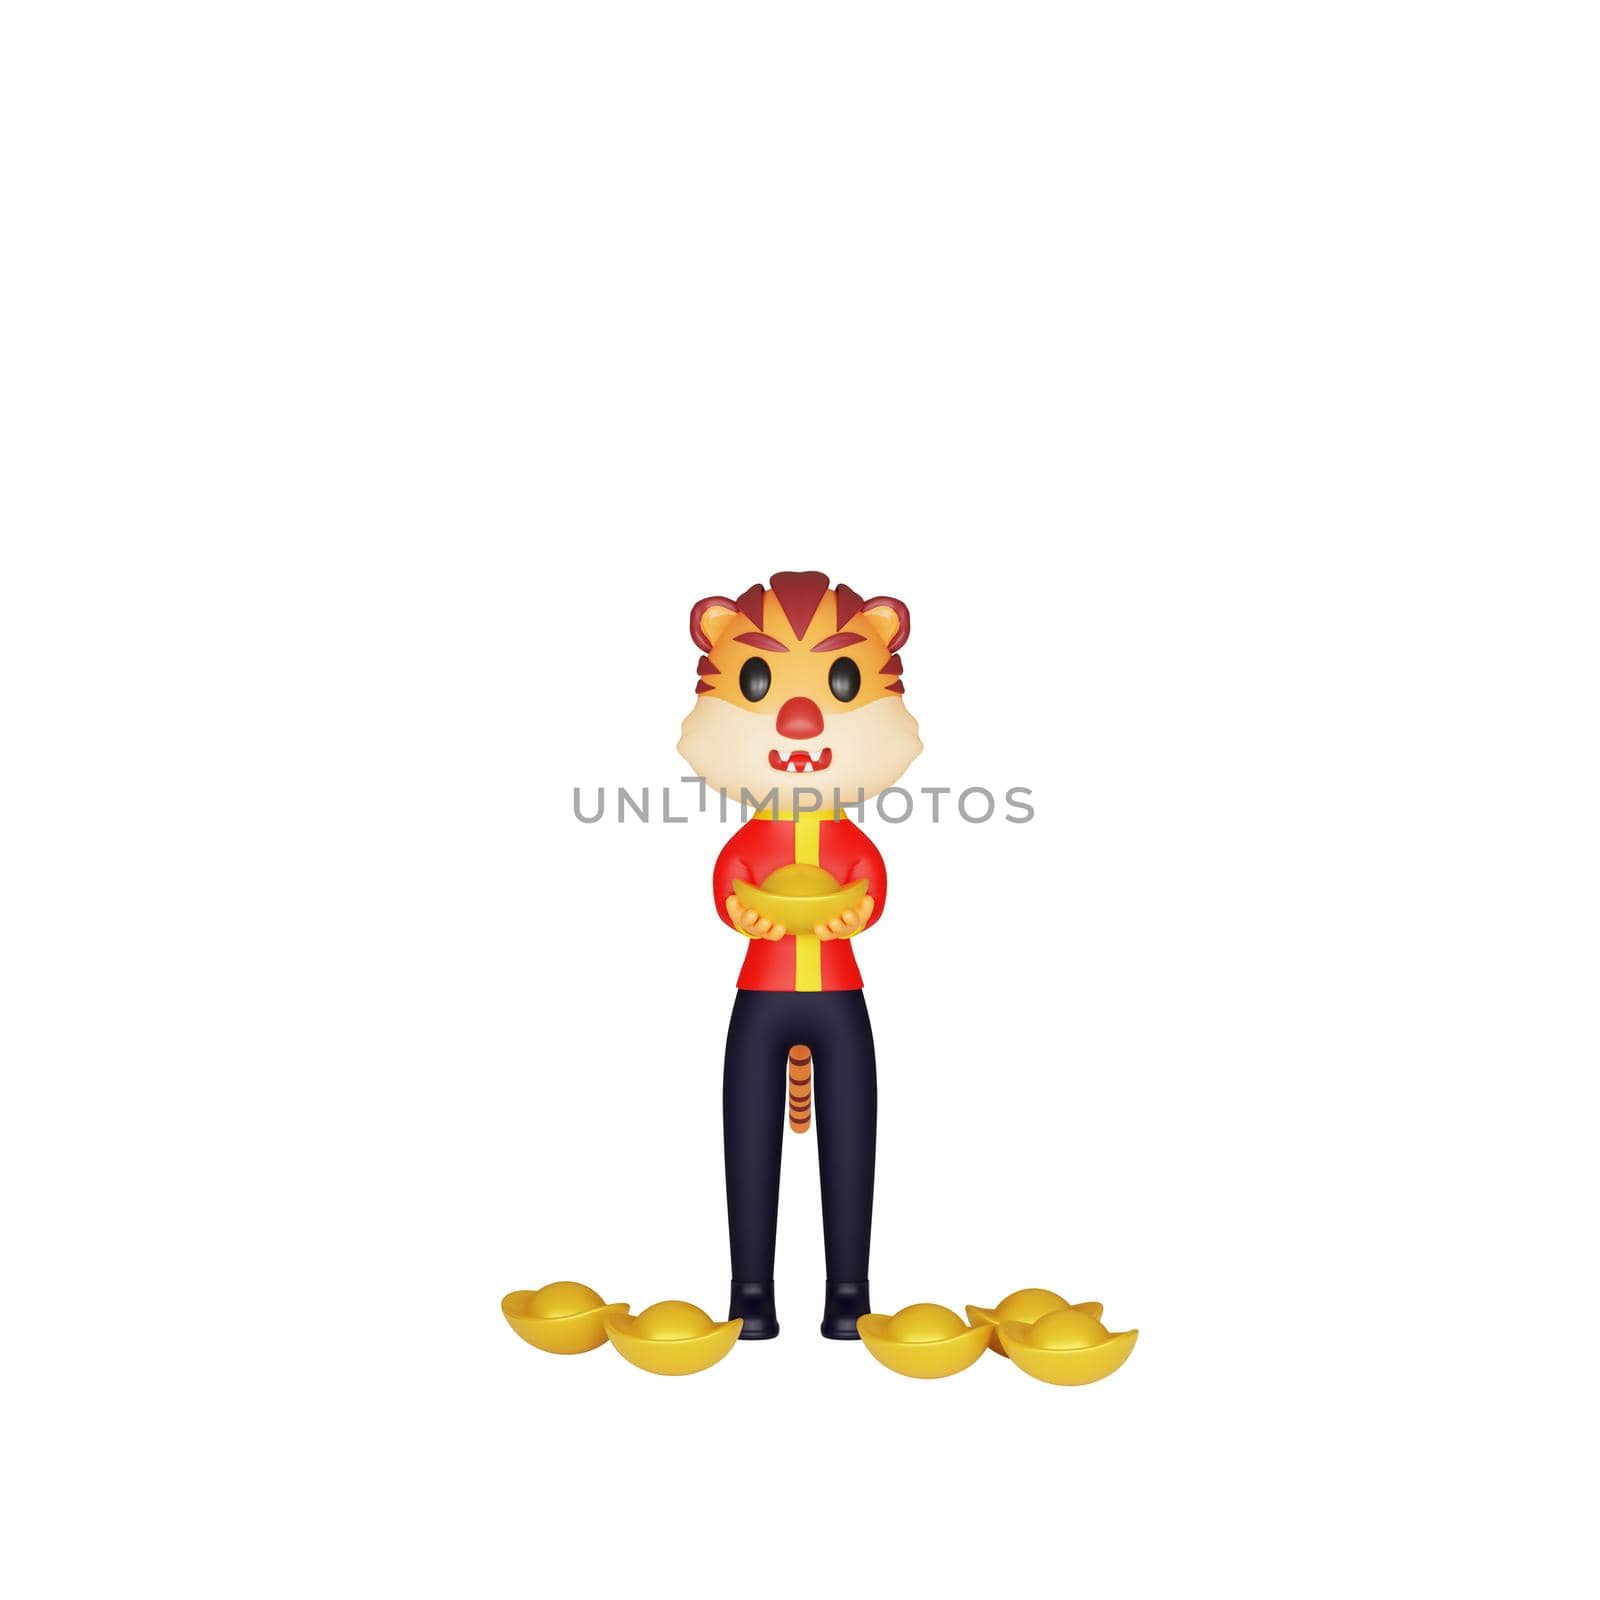 3d rendering of character tiger chinese new year concept